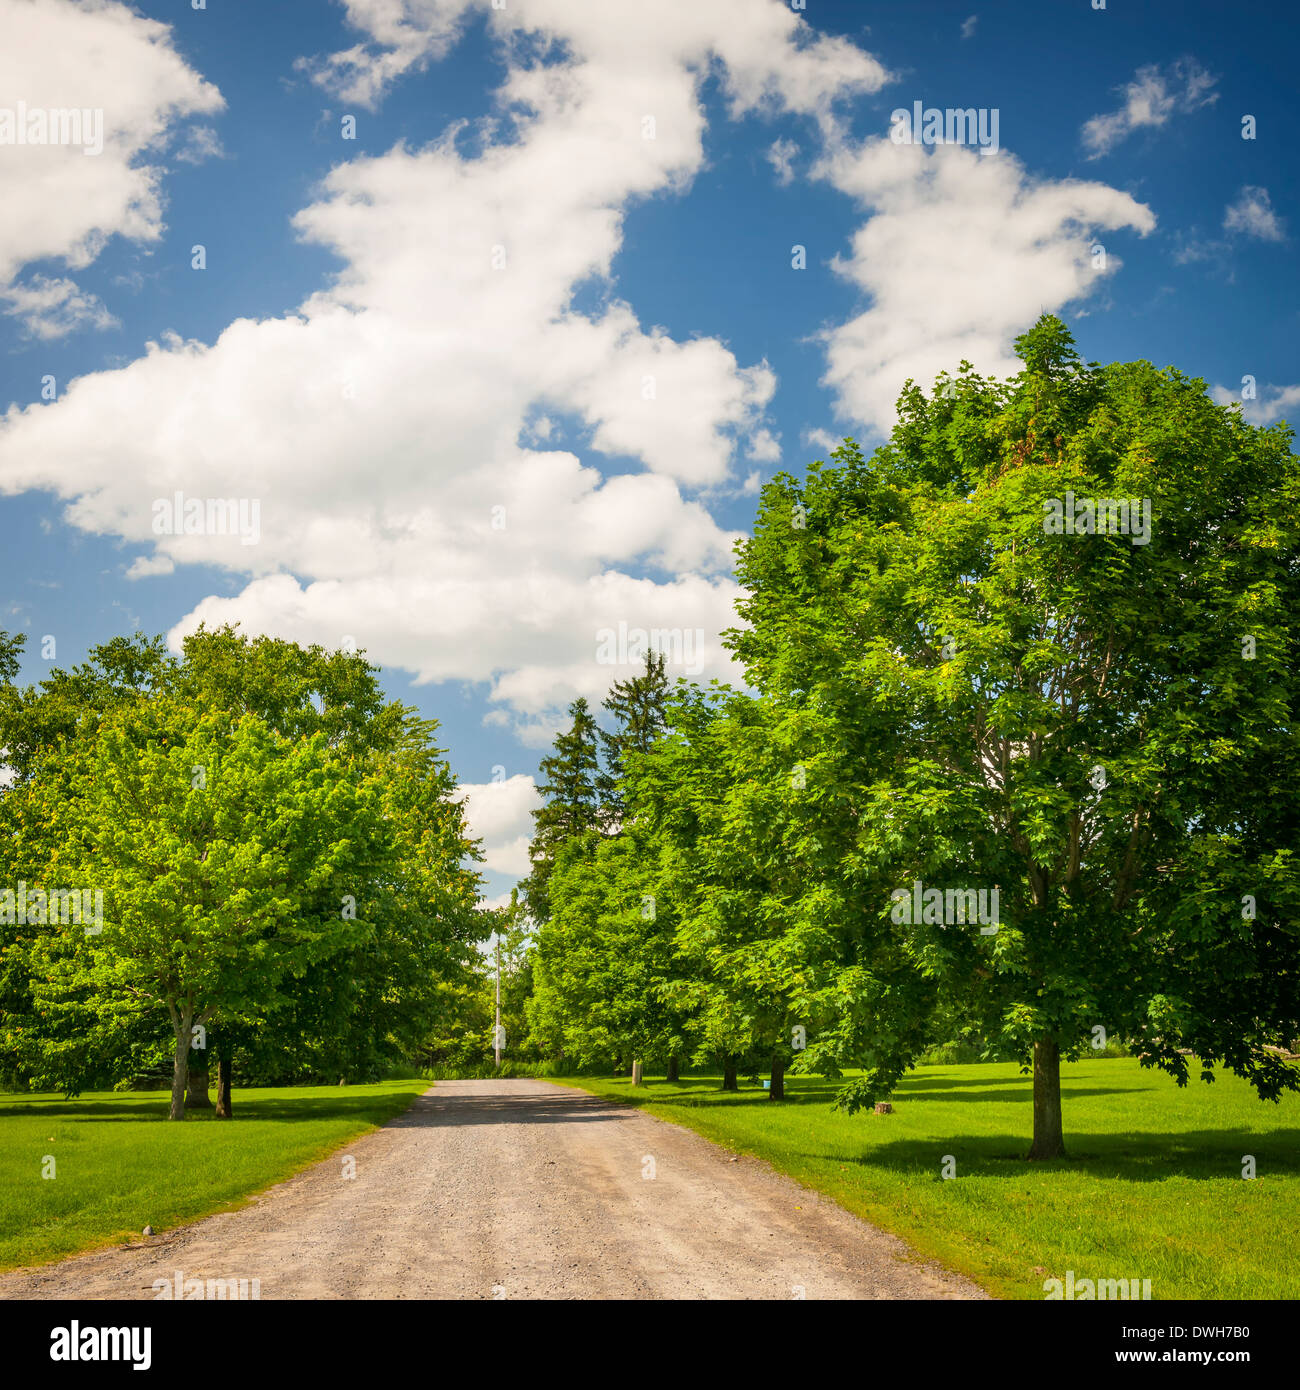 Summer landscape with rural road, lush maple trees and blue sky Stock Photo